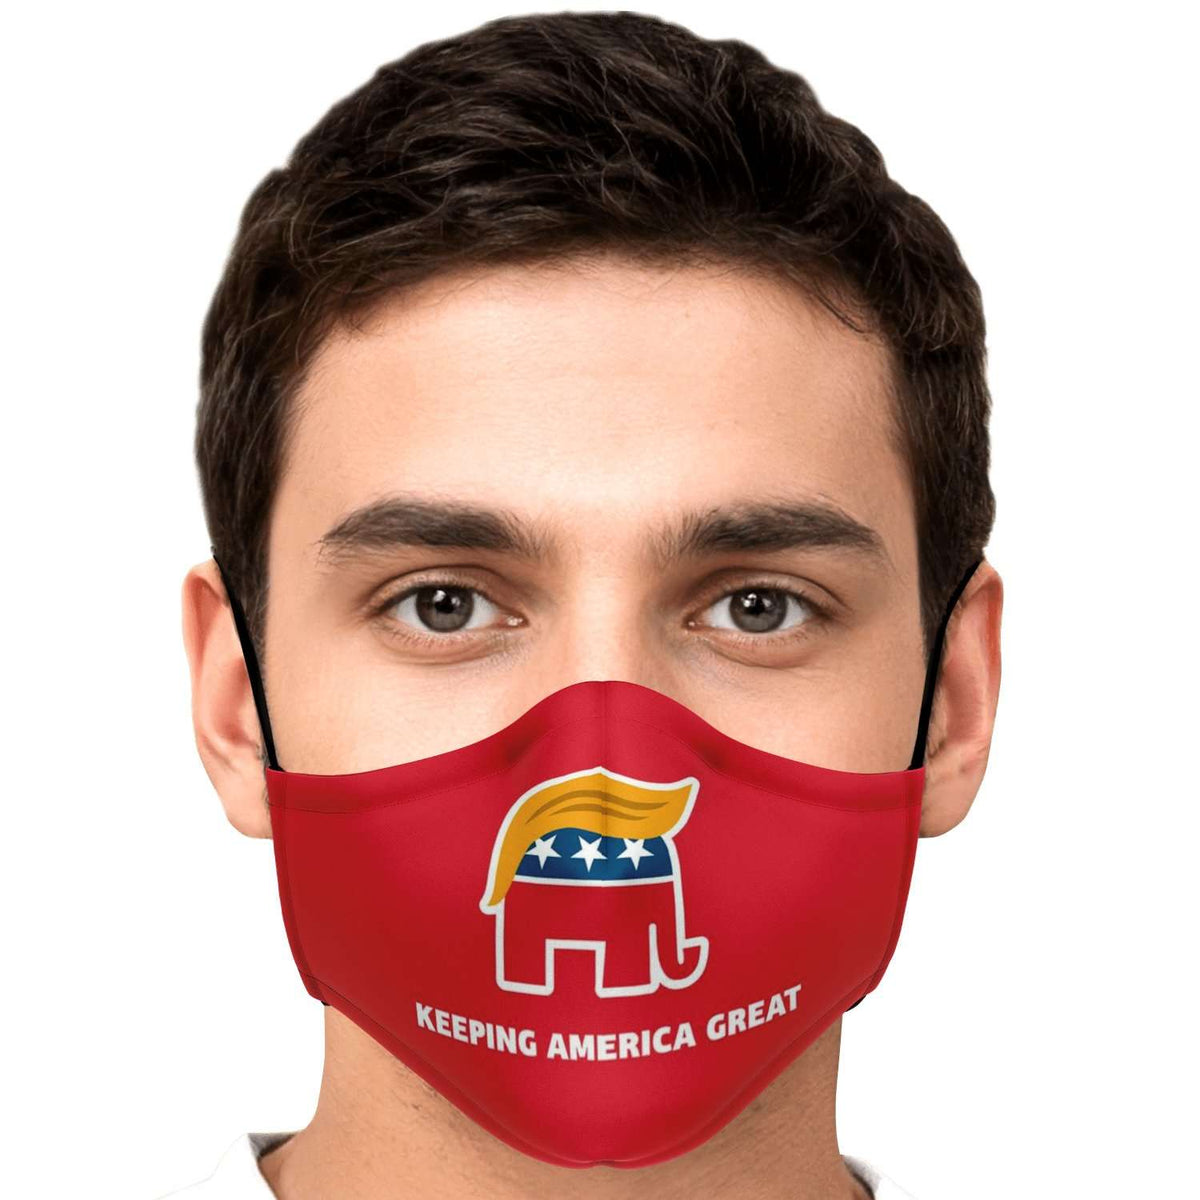 Designs by MyUtopia Shout Out:Trump Elephant Humor Fitted Face Mask w. Adjustable Ear Loops,Adult / Single / No filters,Fabric Face Mask